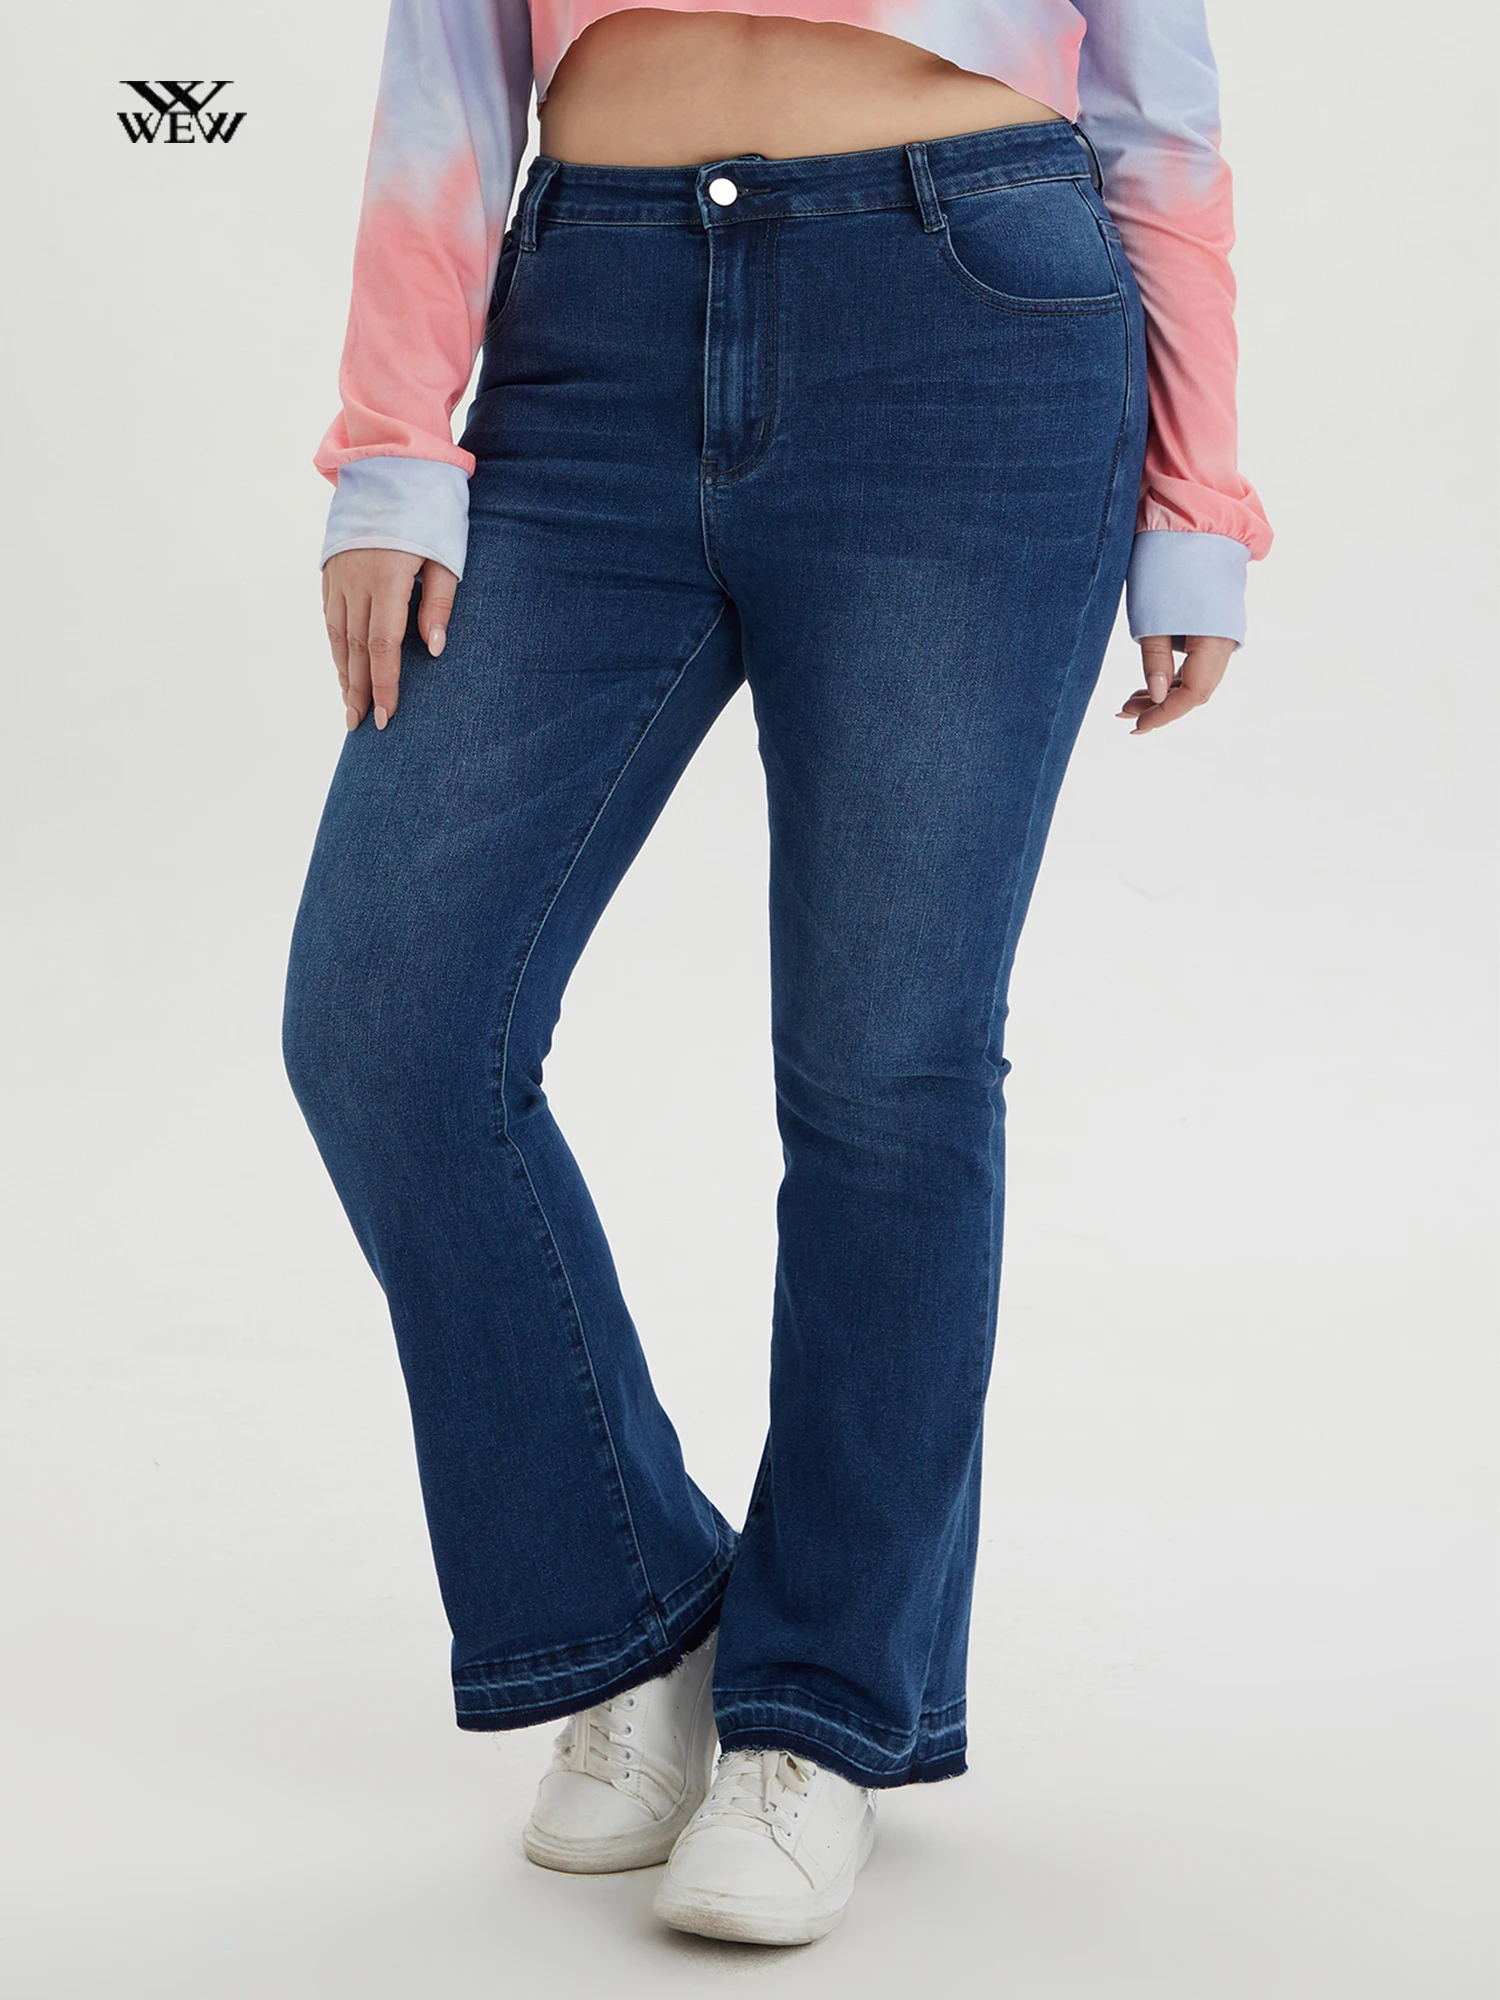 

Plus Size Flared Women Jeans Full Length Denim Jeans High Waist Stretchy 175 Cms Tall Ladies Denim Pants for Mom Curvy Fitting